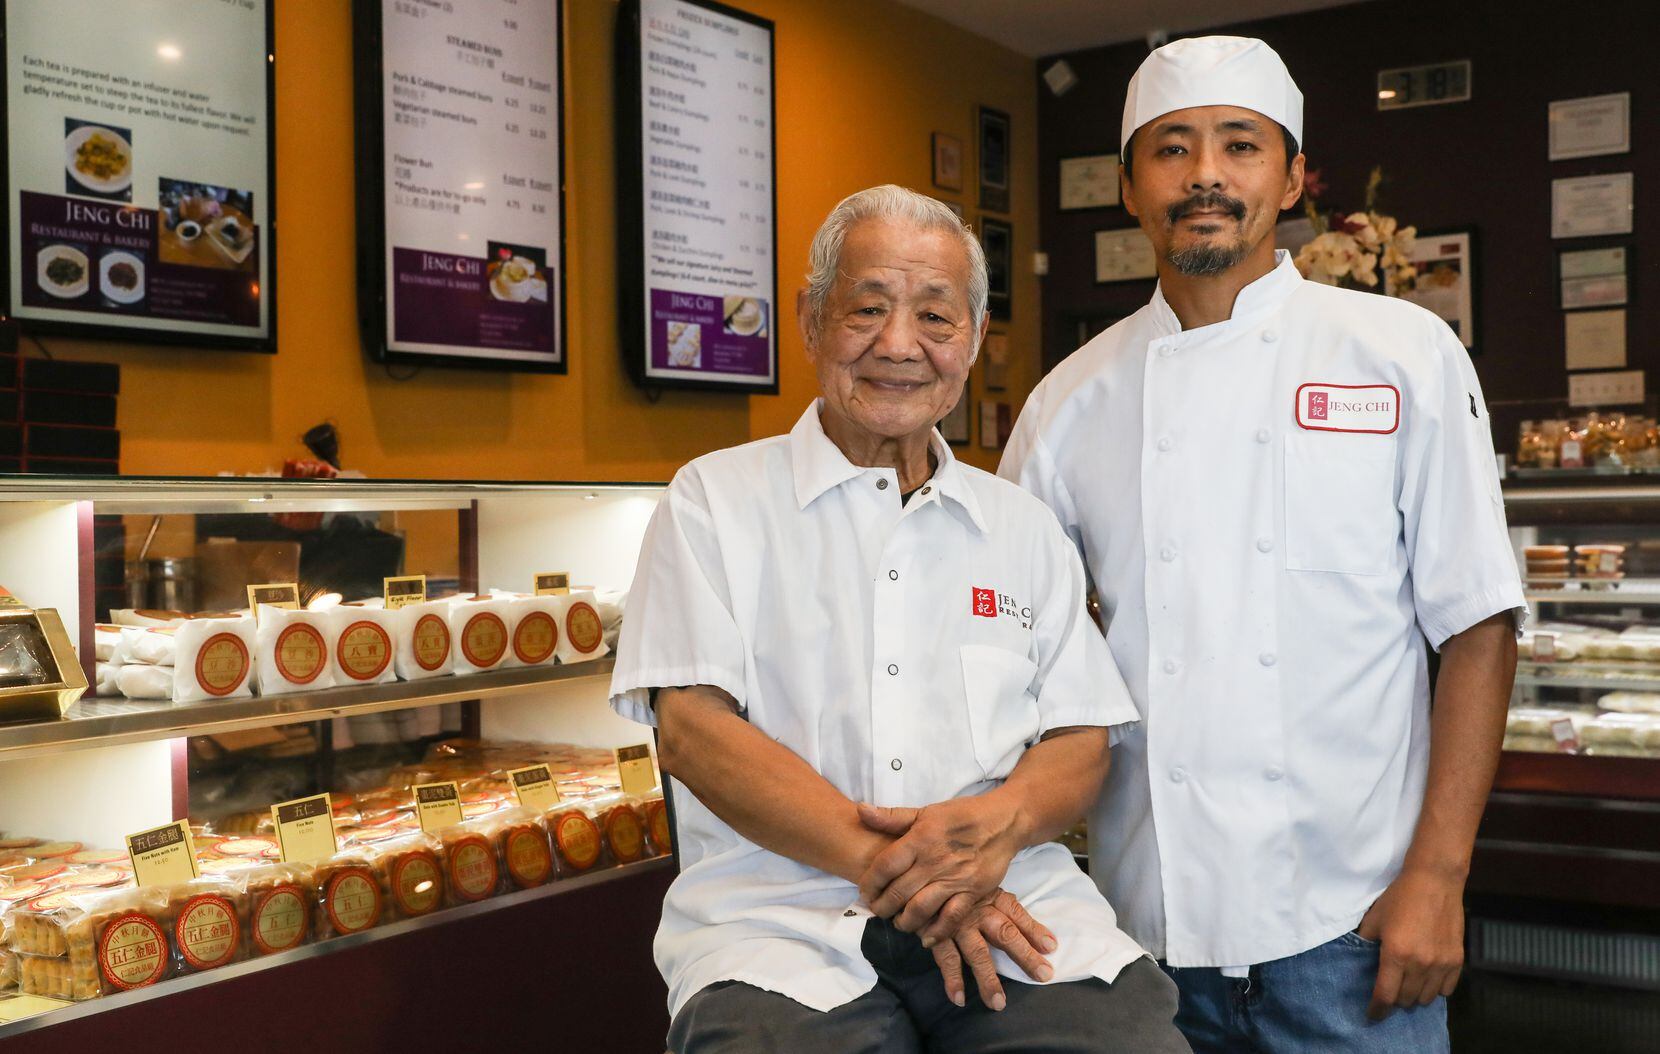 Jeng Chi owner Yuan Teng, known as the “the master” of mooncakes, and his son Francisco Teng...